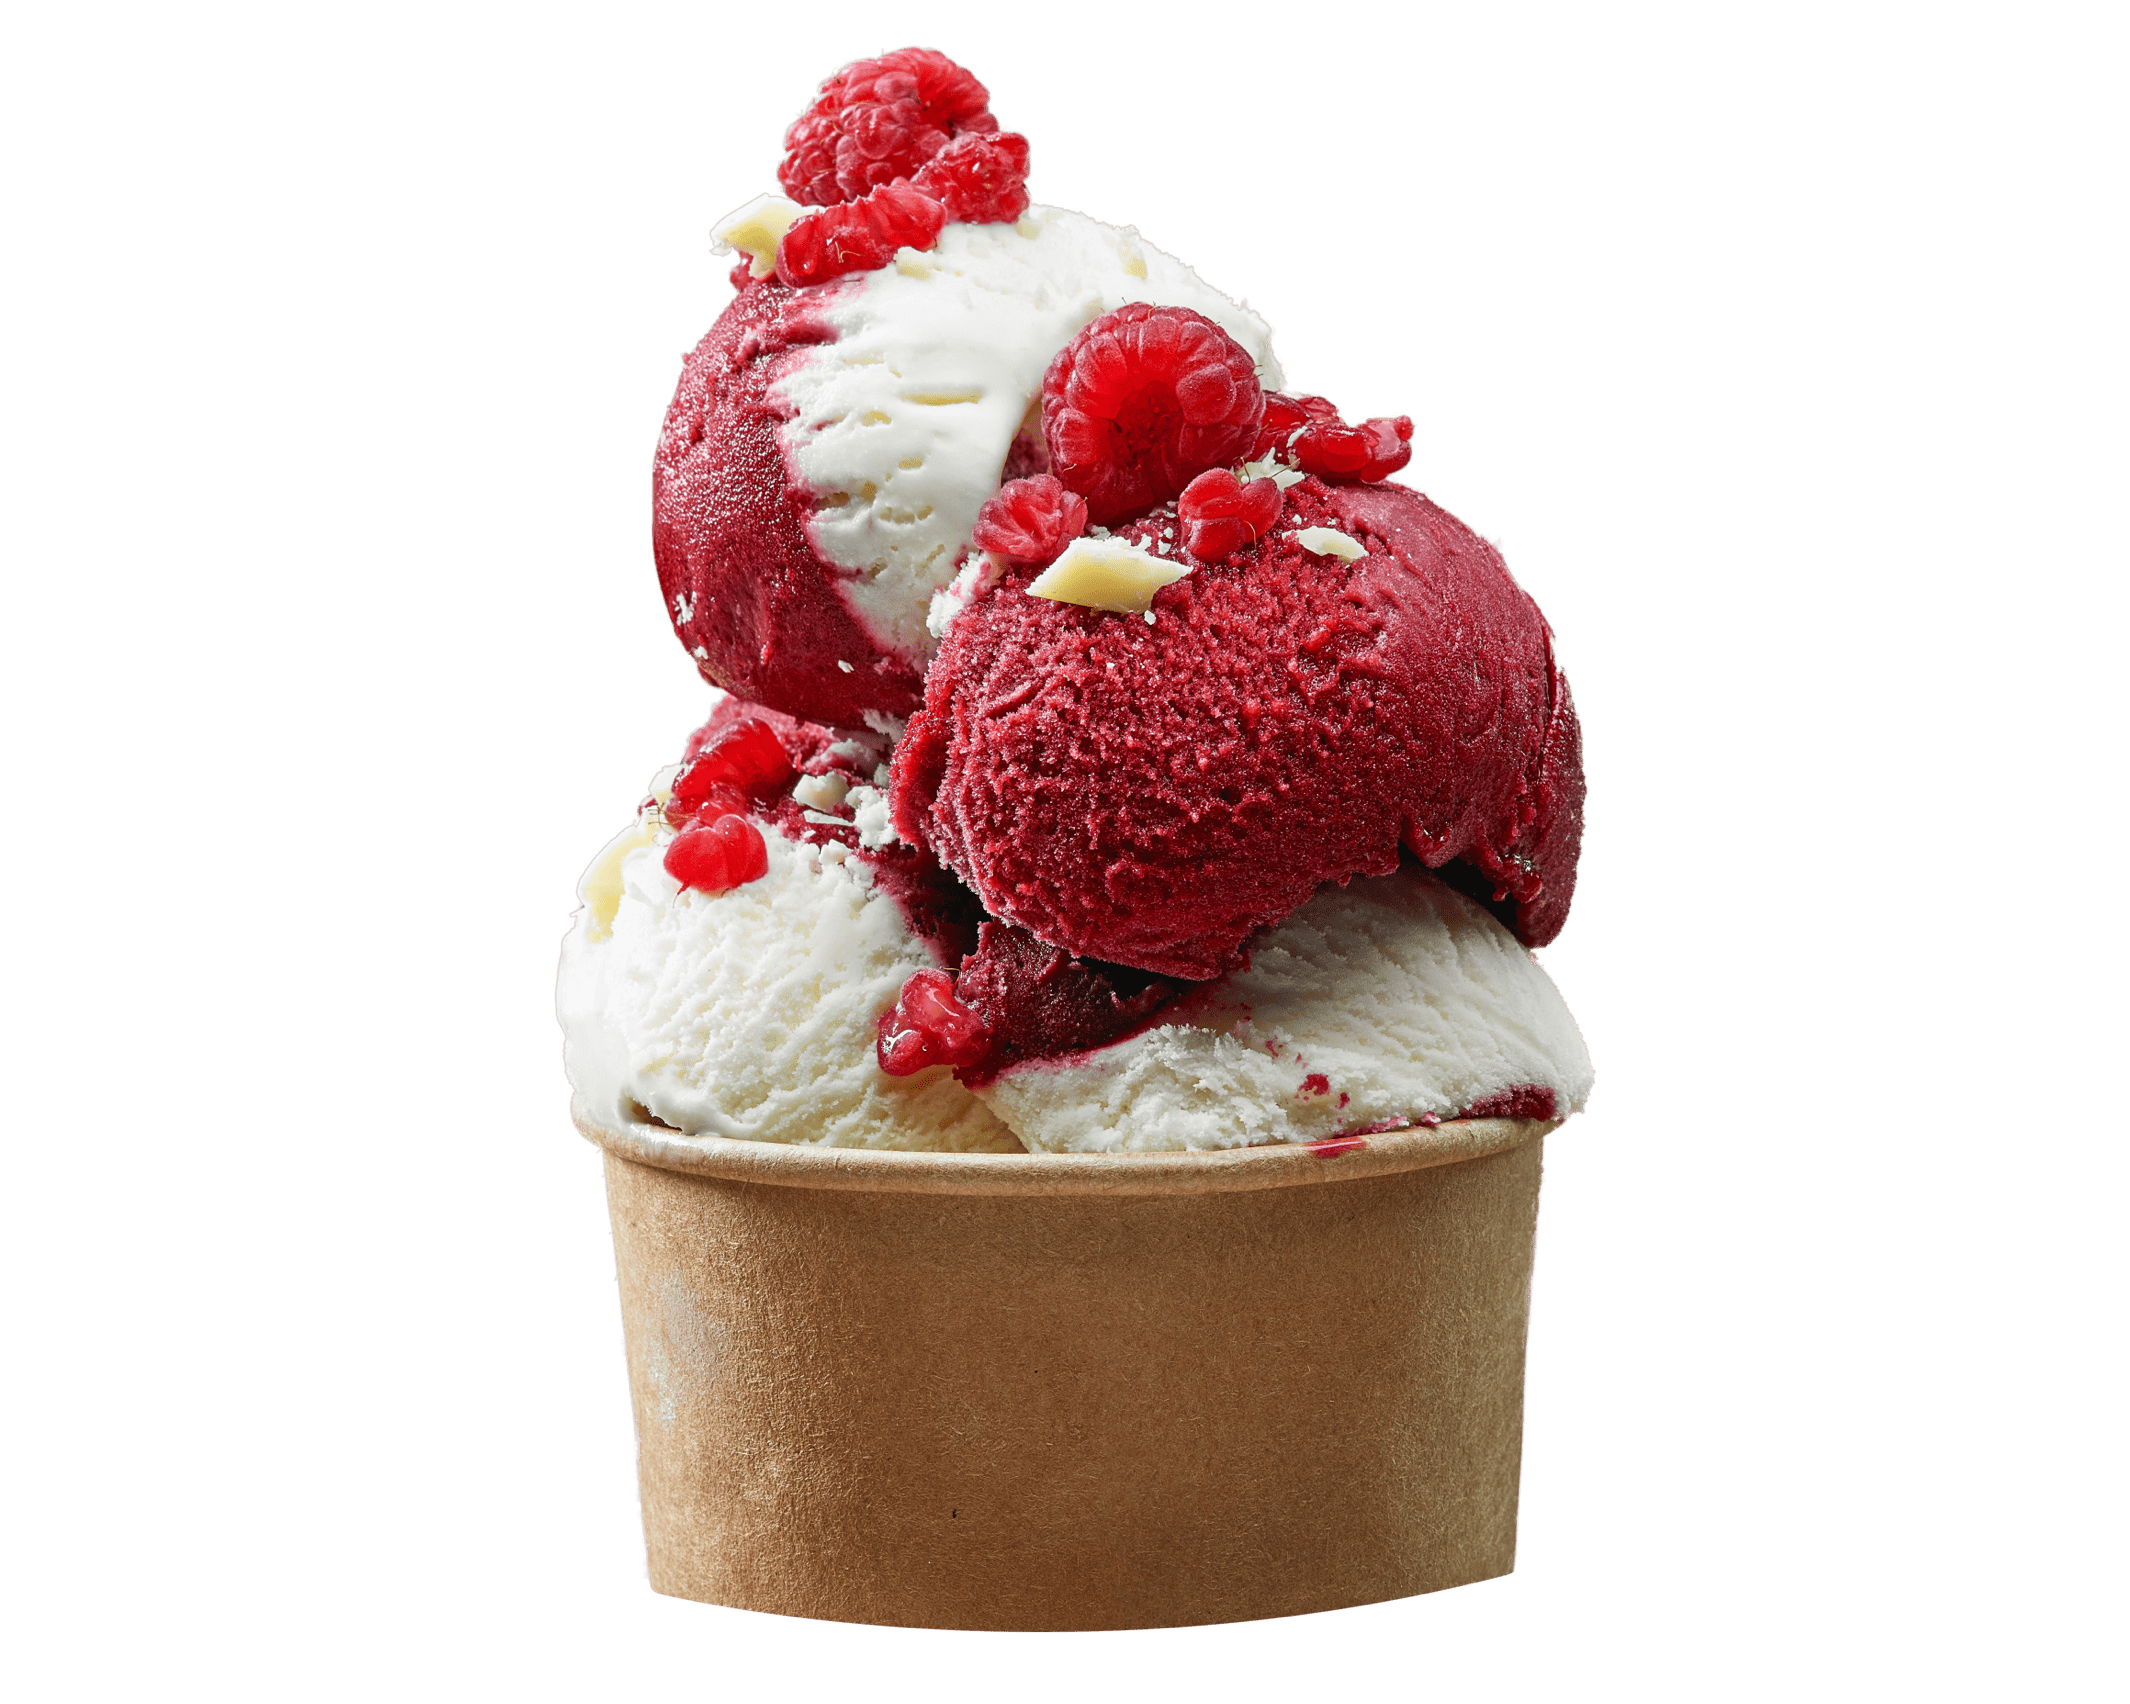 Scoops of flavoured frozen dessert in a cup with raspberries 